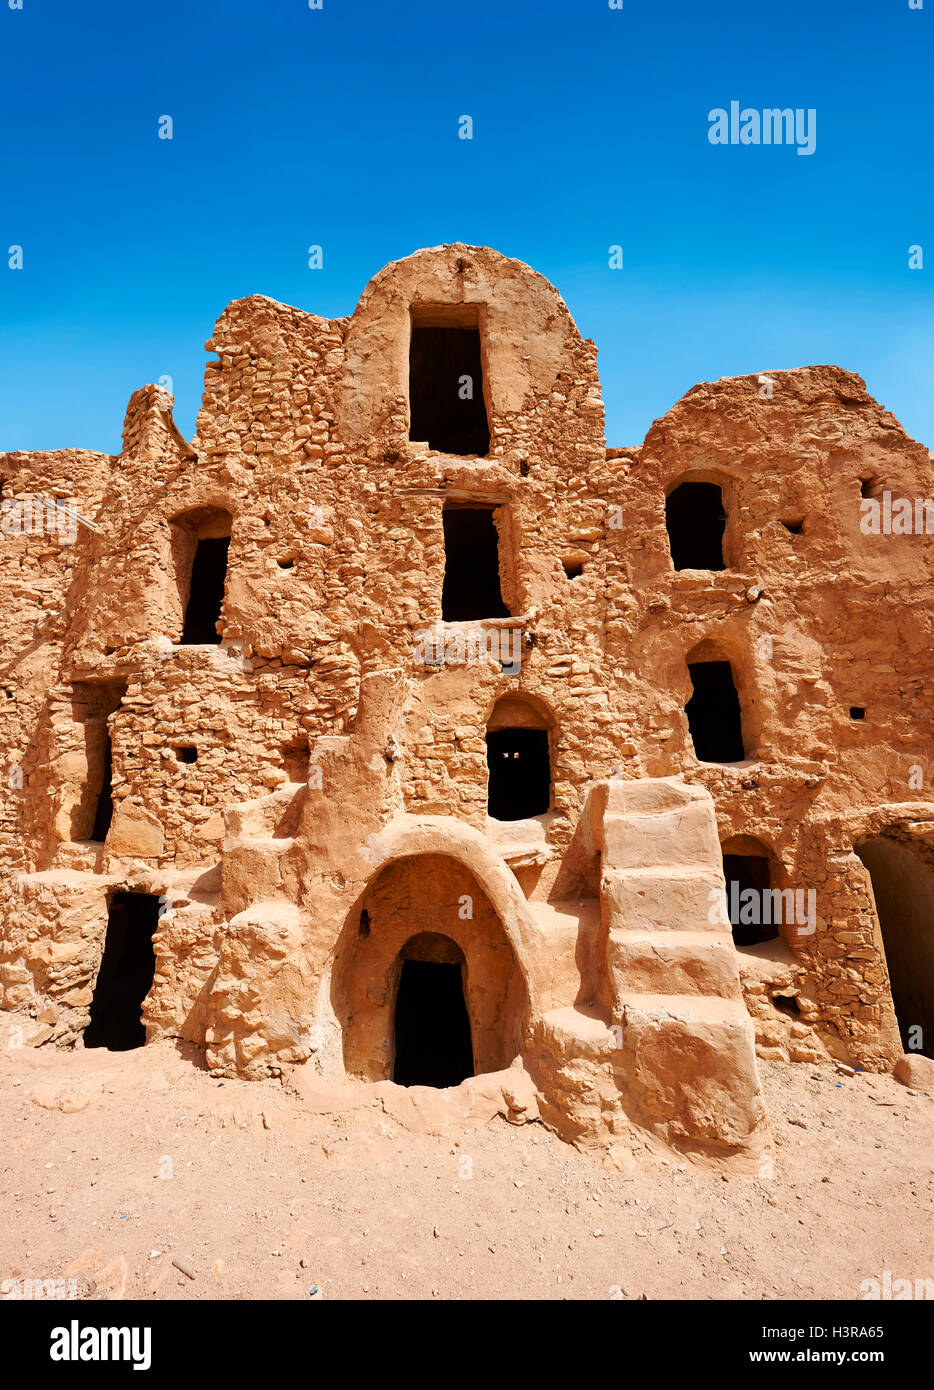 The traditional north Sahara fortified Berber Ksar El Mguebl and its adobe mud ghorfas graneries, near Tataouine, Tunisia Stock Photo